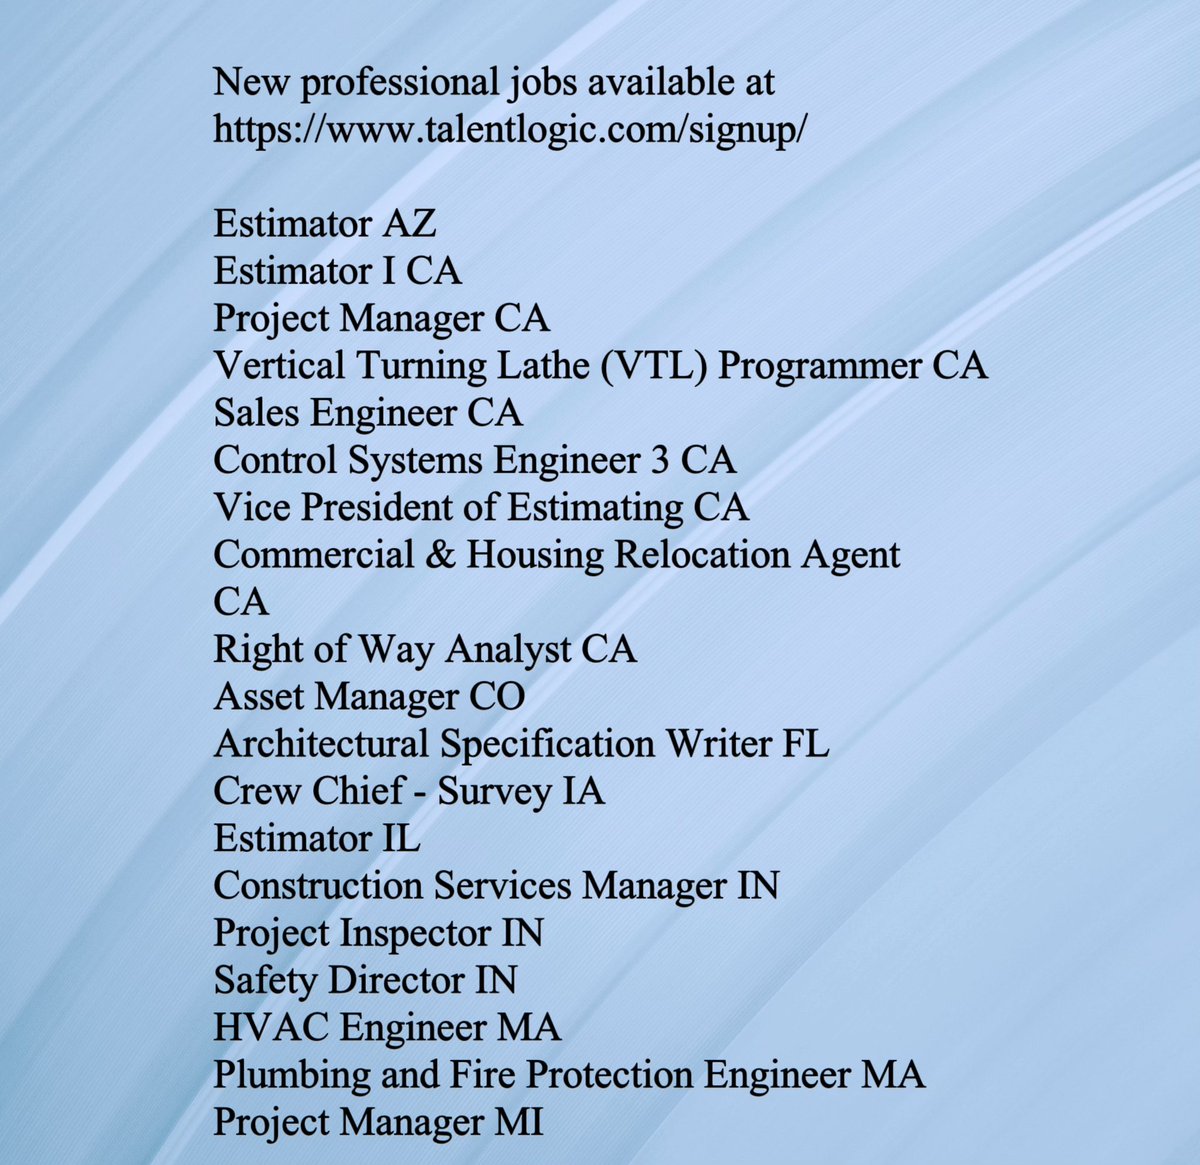 New professional jobs available at 
talentlogic.com/signup/

#rightofwayanalyst #commericalhousing #relocationagent #safetydirector  #hvacengineer #projectmanager #plumbingandfireprotection #engineer #controlsystems